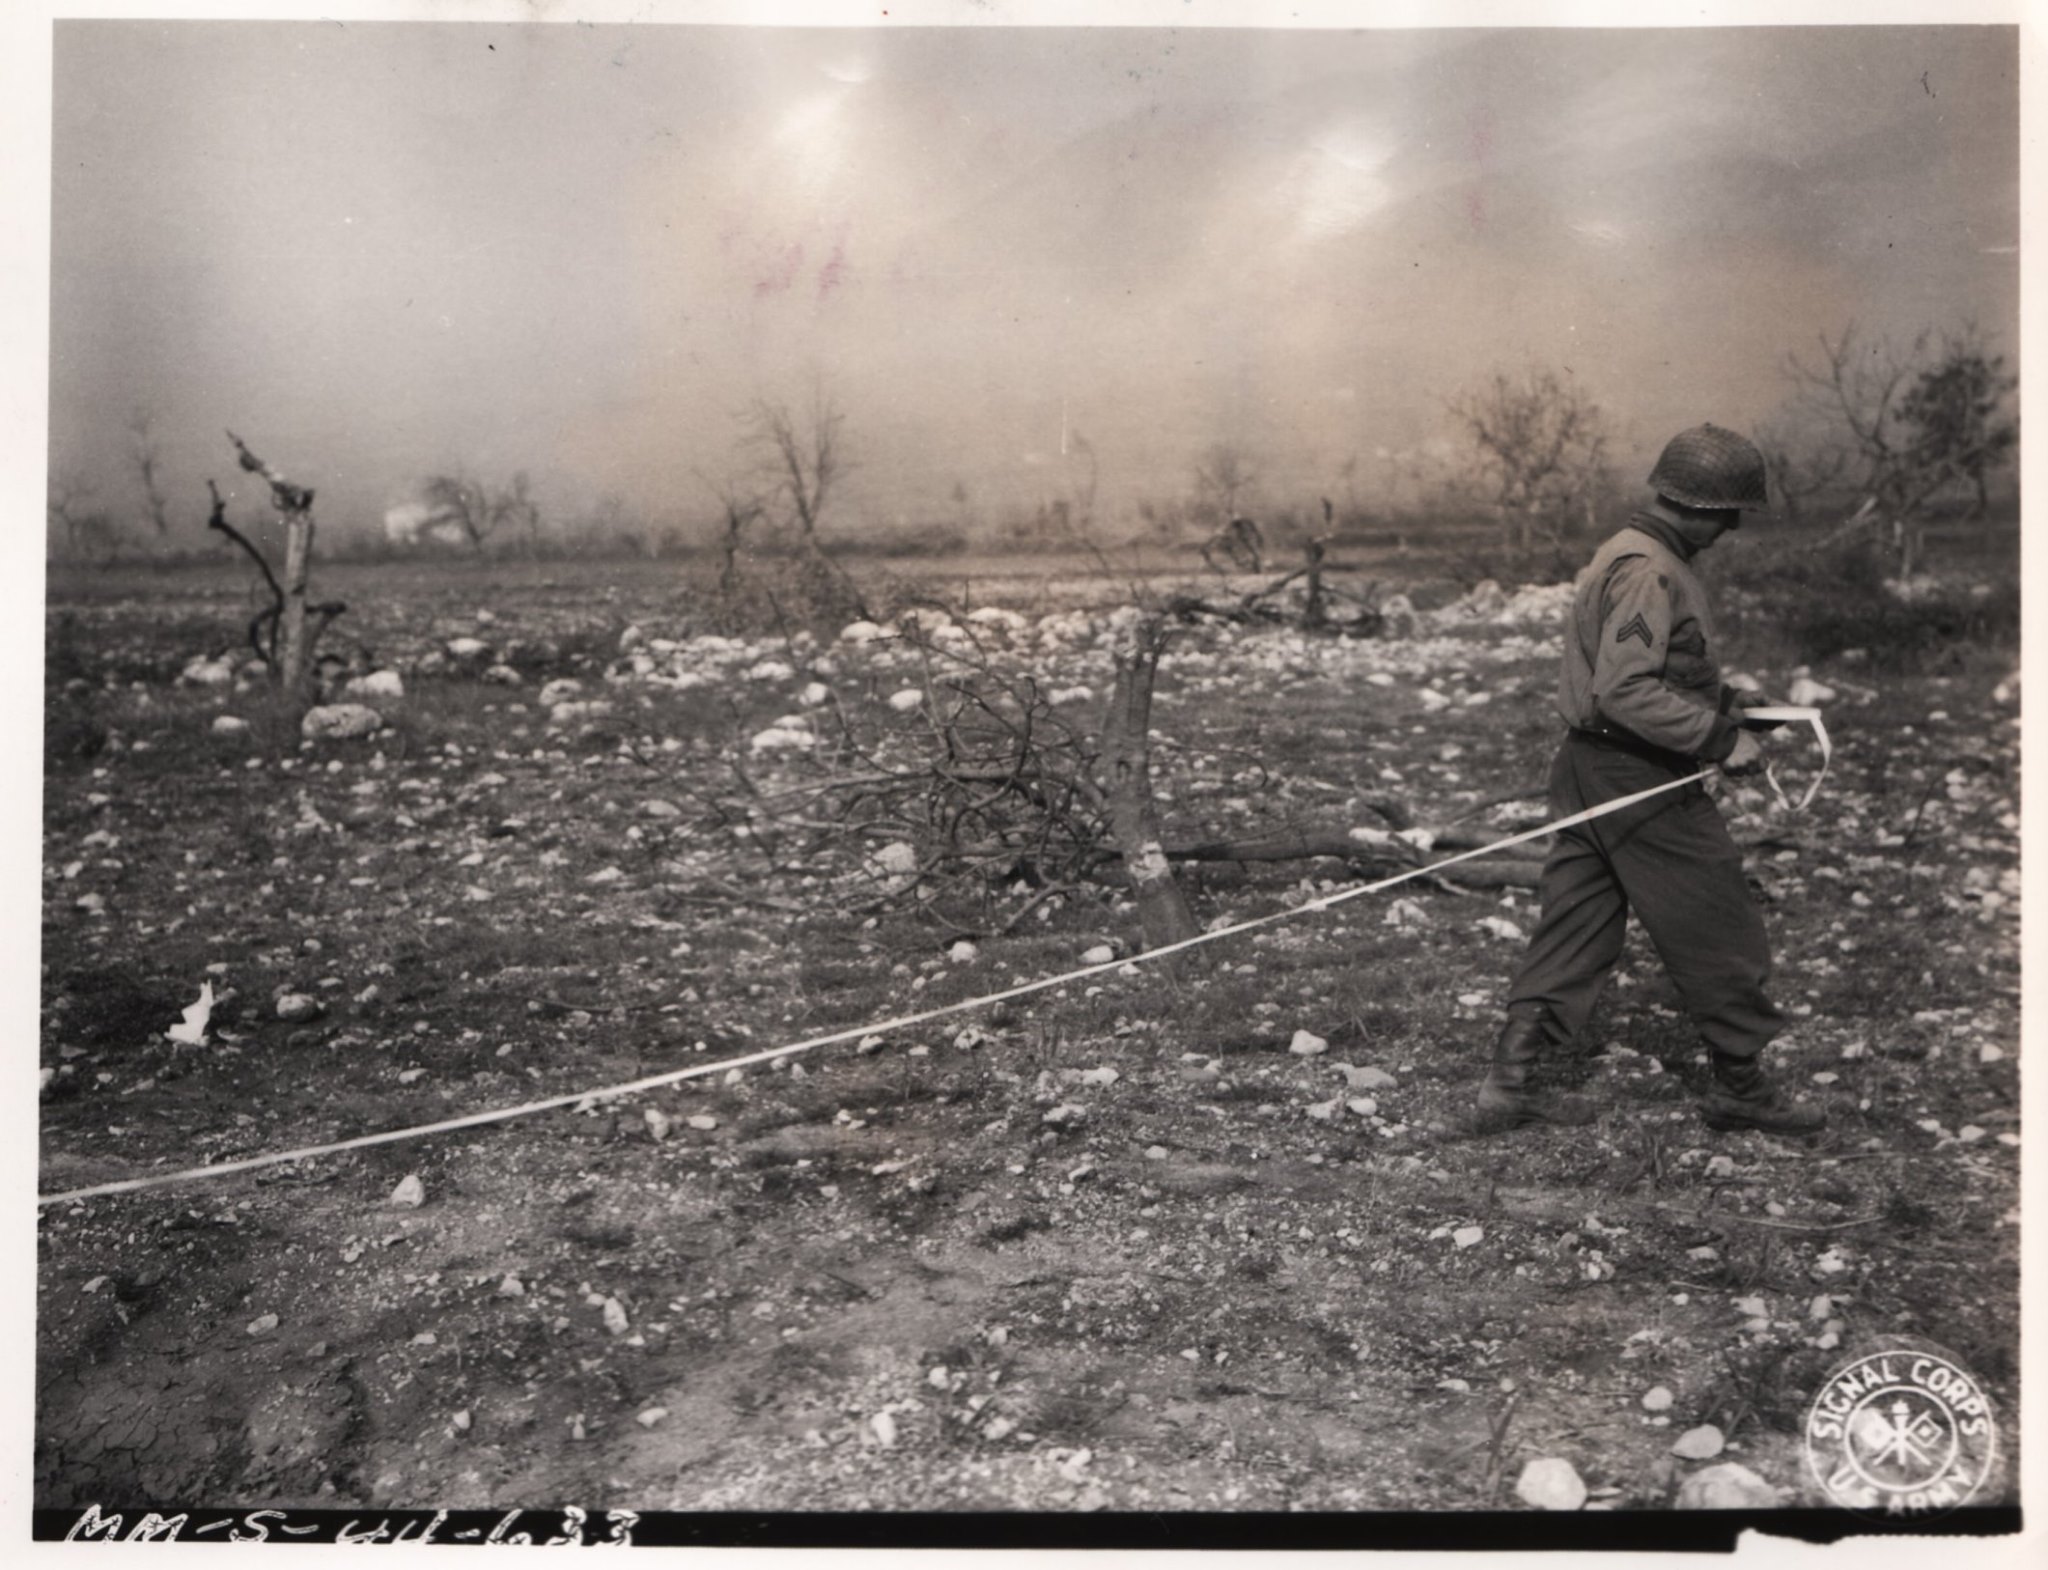 <p class='eng'>January 1944 Rapido River area. Soldiers of reconnaissance company or the 636th tank destroyer battalion, cleared mine fields, another soldier comes up from behind and lays tape, marking off clear area" (Photo by Paluch 163rd Signal Photo Company - NARA)</p>